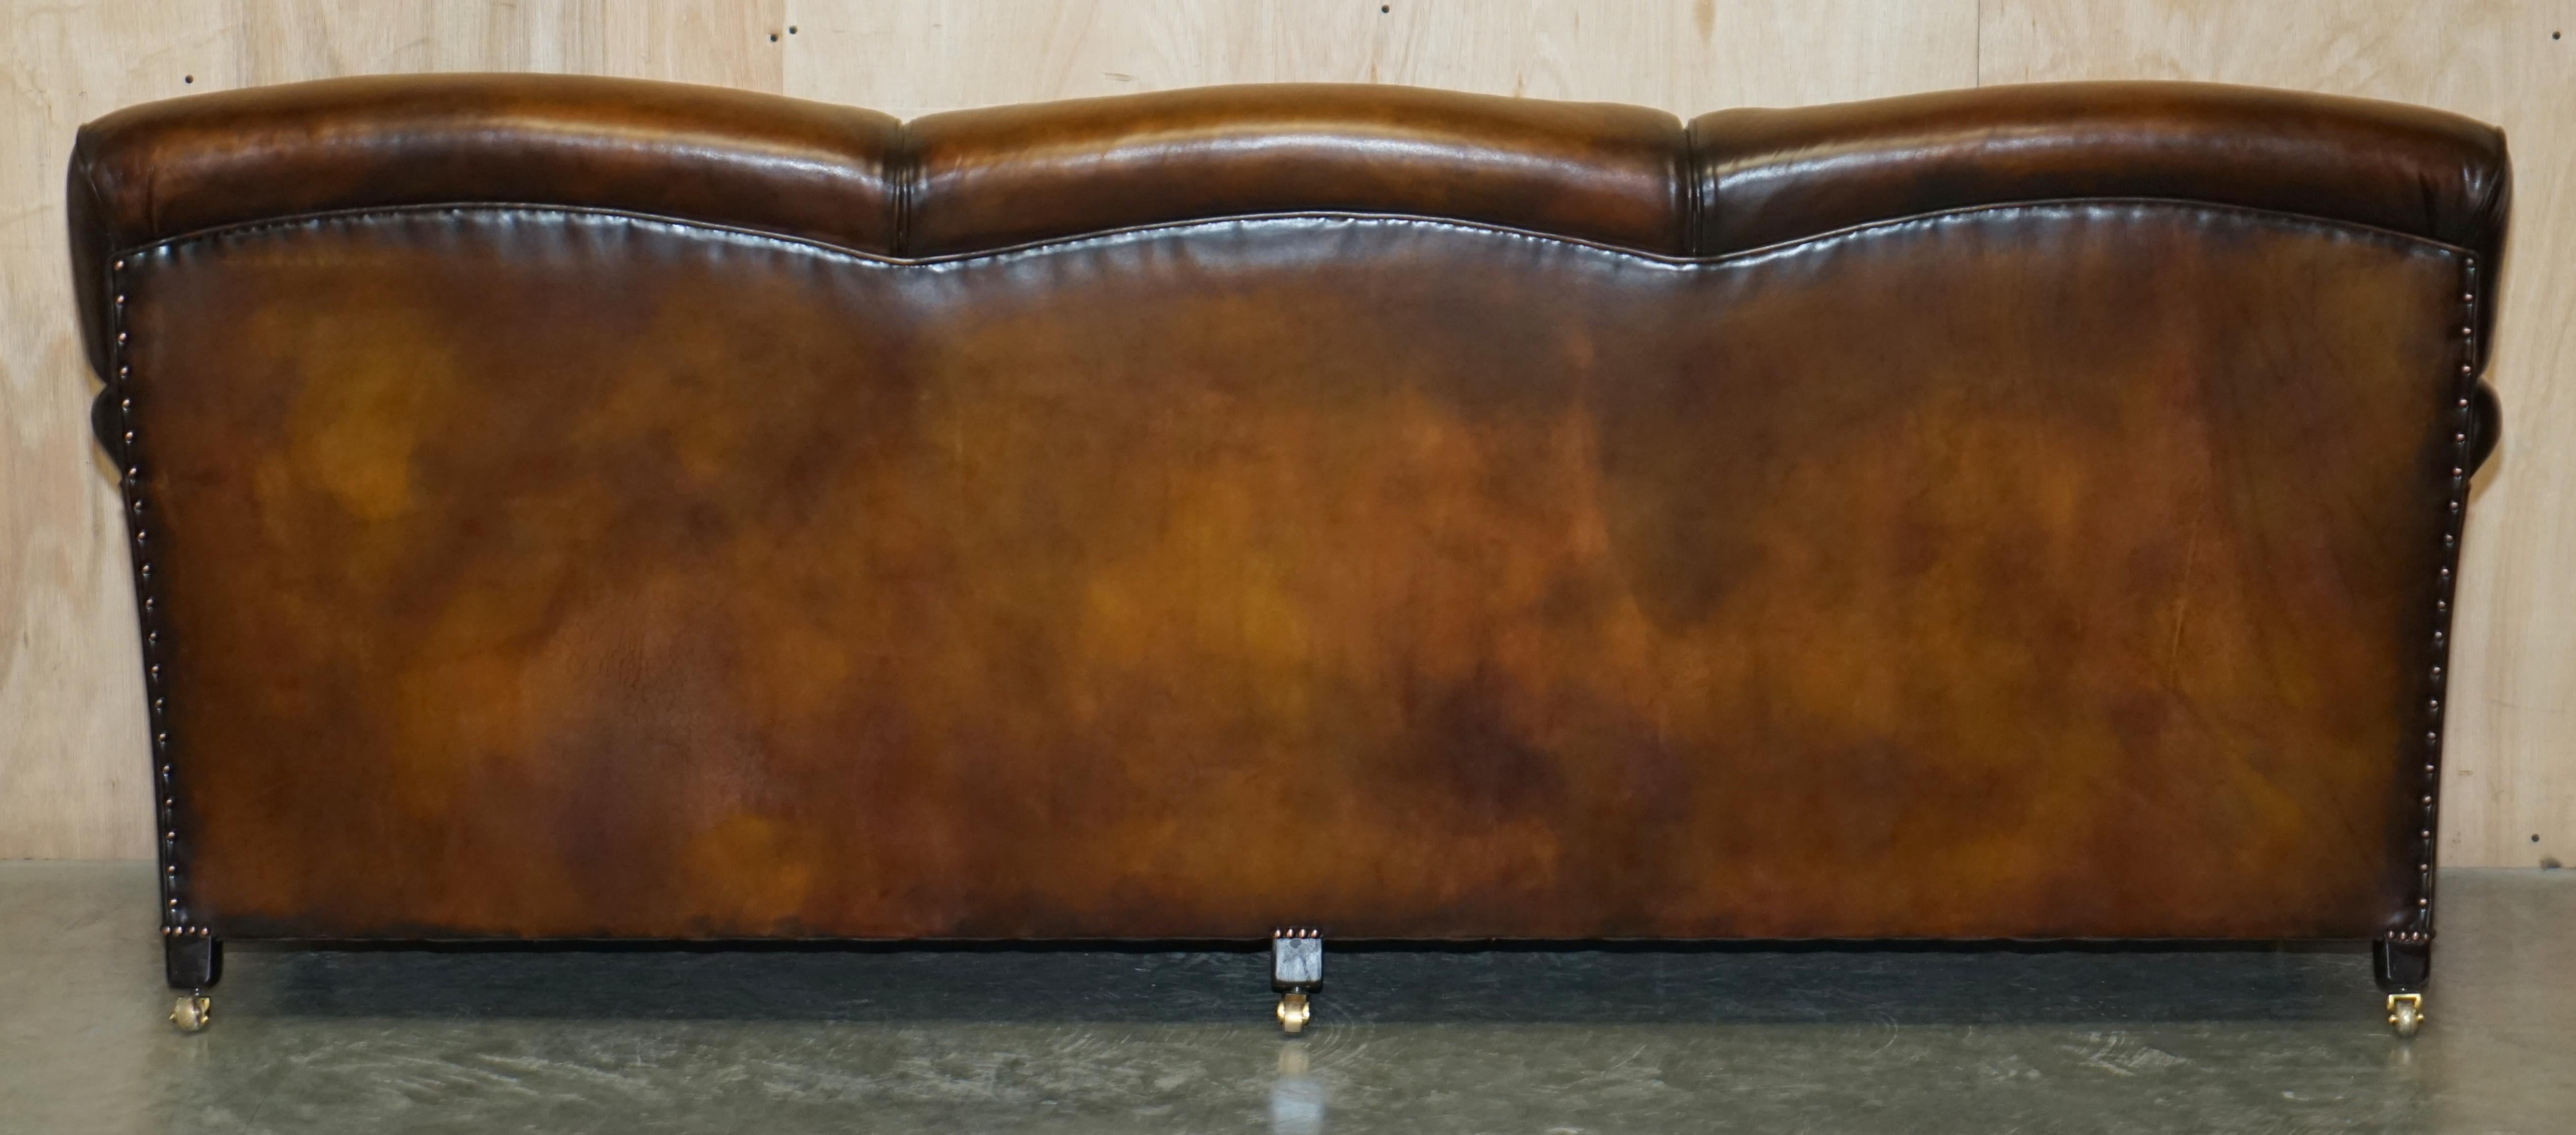 1 von 2 LARGE GEORGE SMITH HOWARD & SON's BROWN LEATHER SIGNATURE SCROLL ARM SOFA im Angebot 12